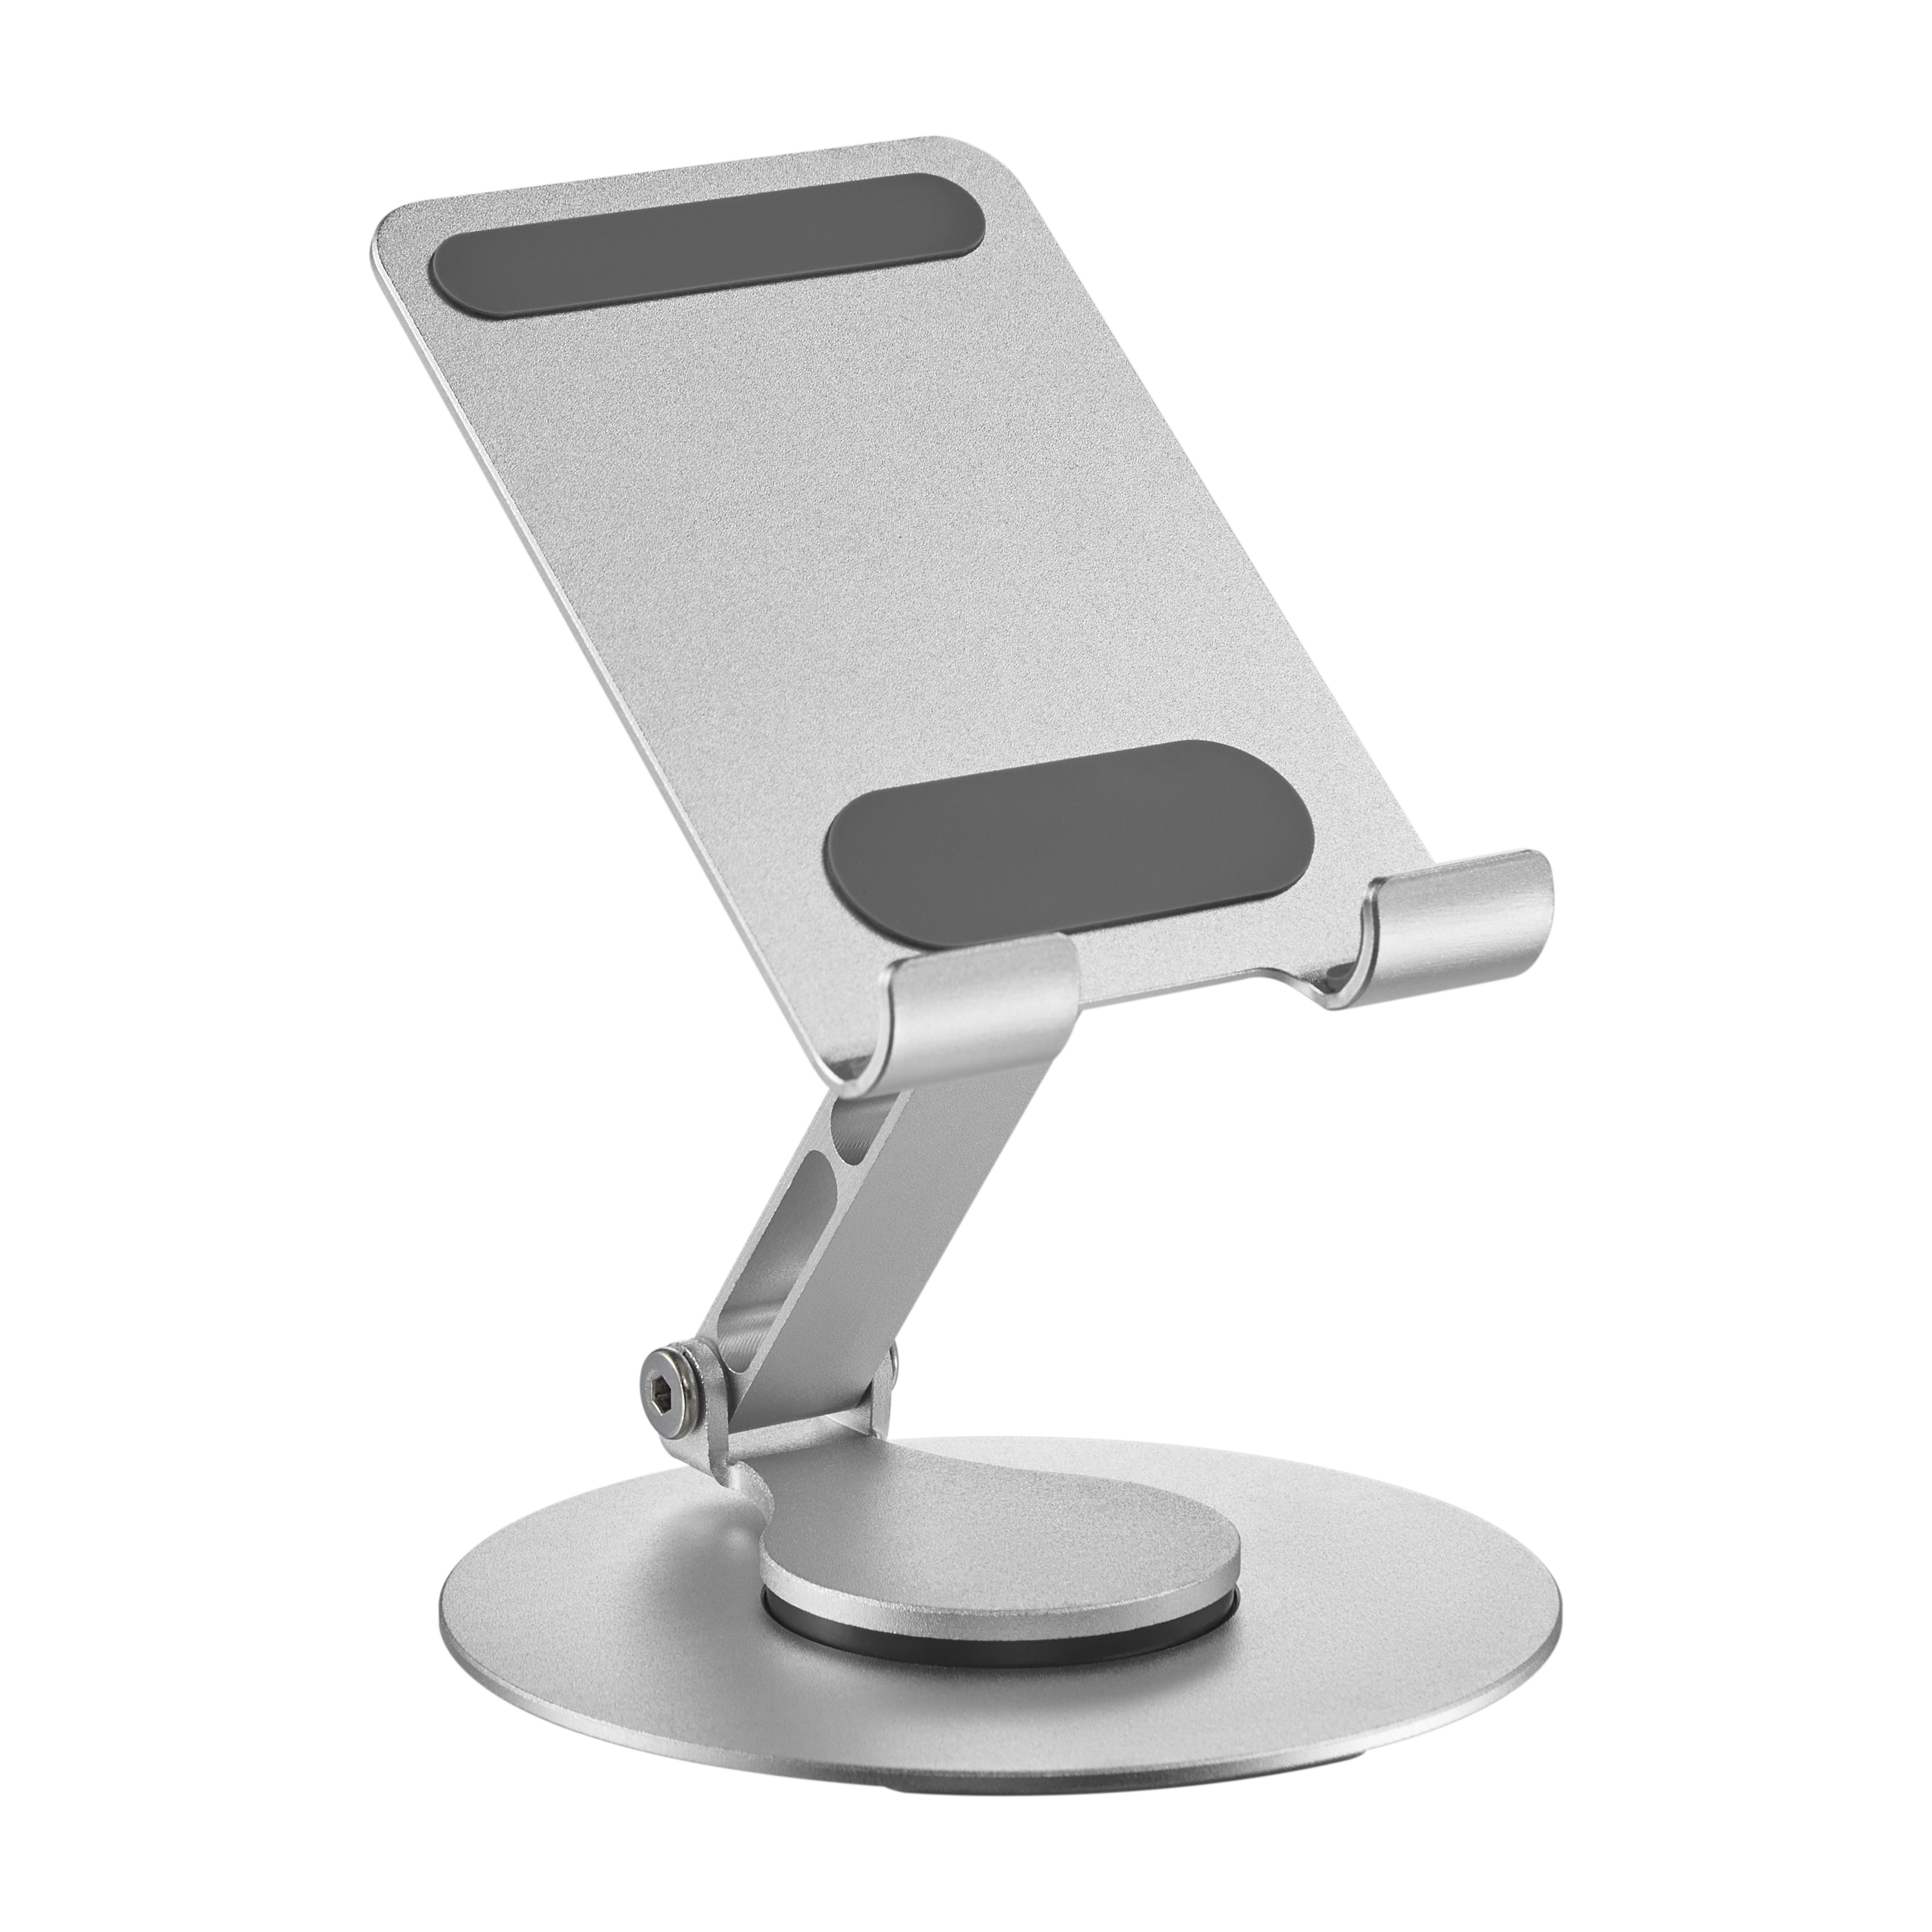 Foldable 360° Rotating Tablet Stand